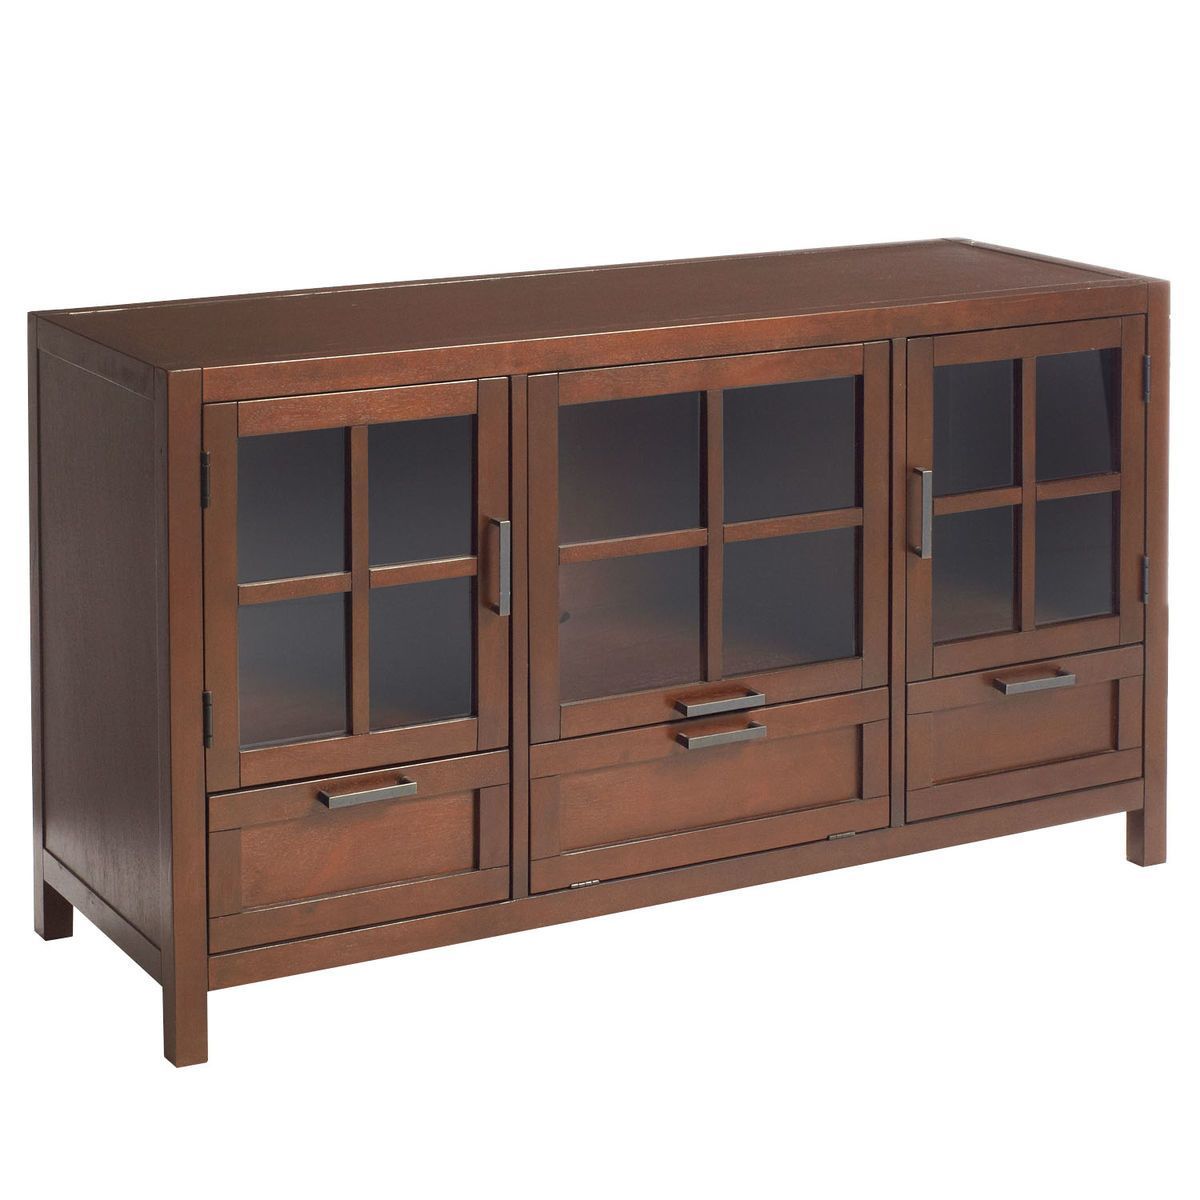 Sausalito Mahogany Brown Modular 52" Tv Stand | Pier 1 Intended For Modular Tv Stands Furniture (Photo 3 of 15)